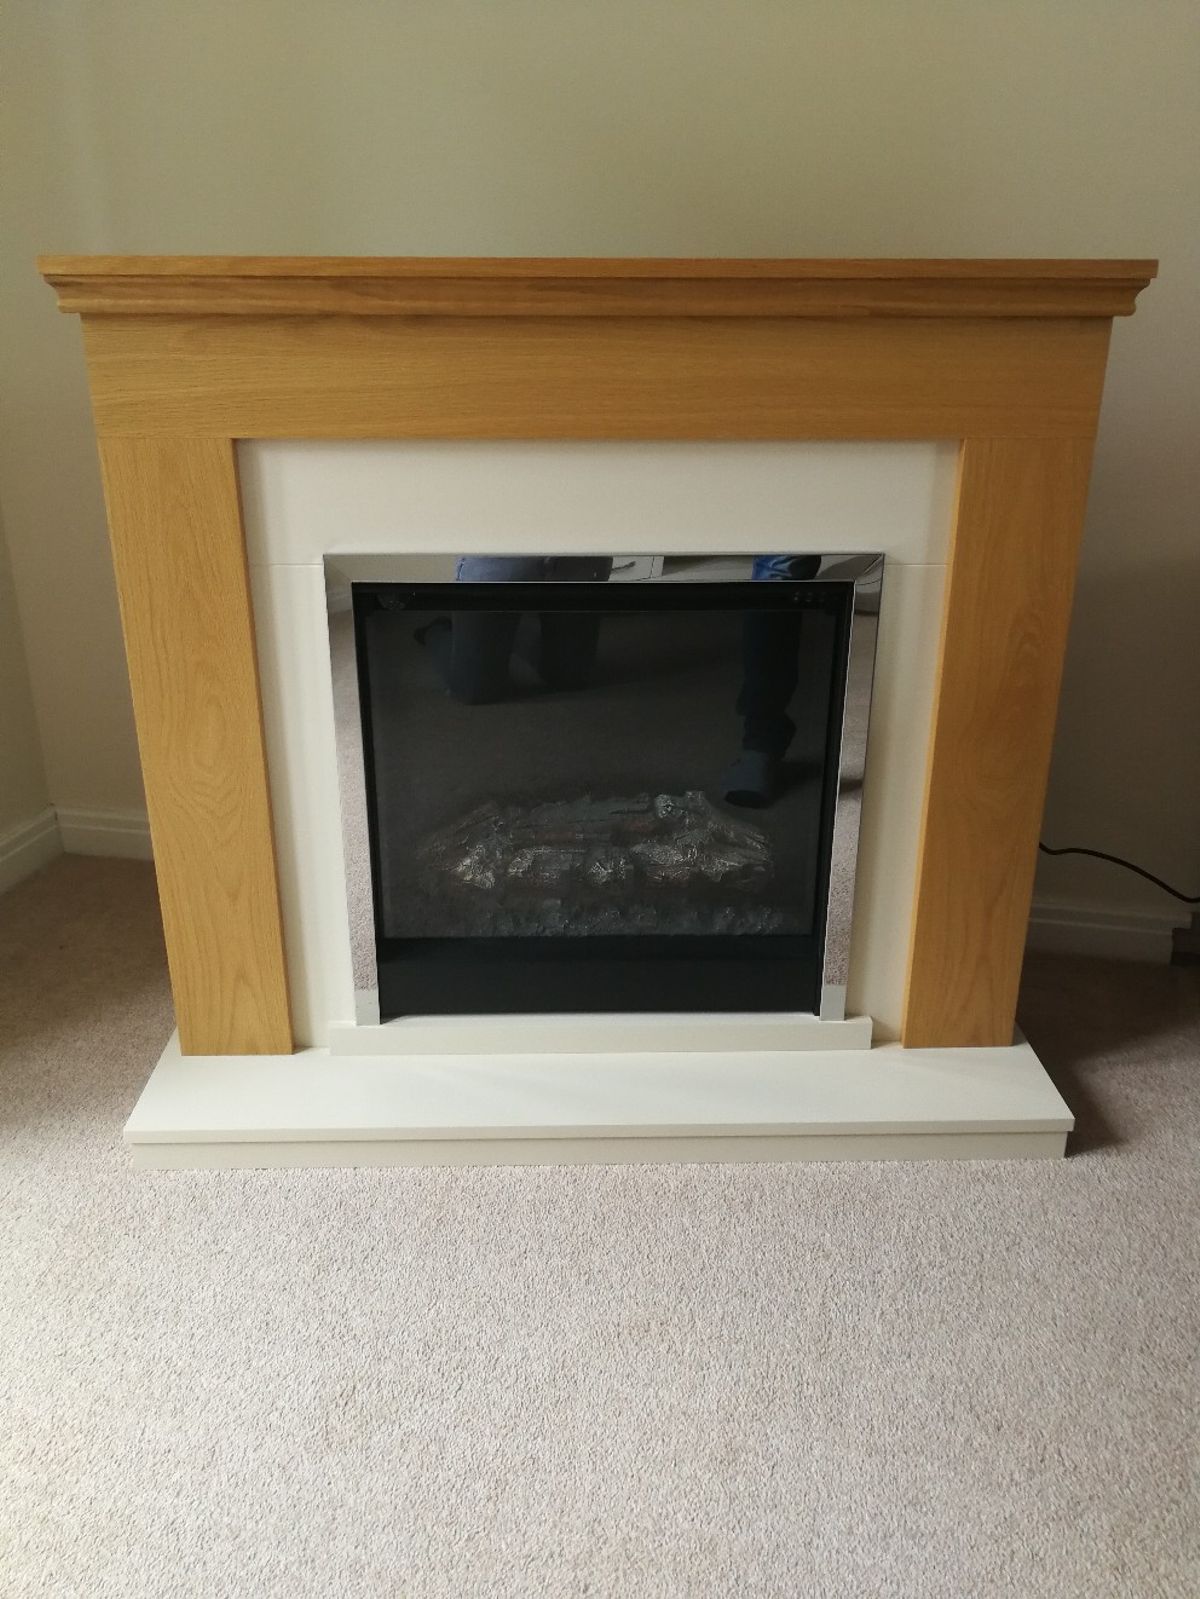 Electric Fireplace with Bookshelf Best Of Electric Fireplace with Wooden Surround In Le12 Charnwood